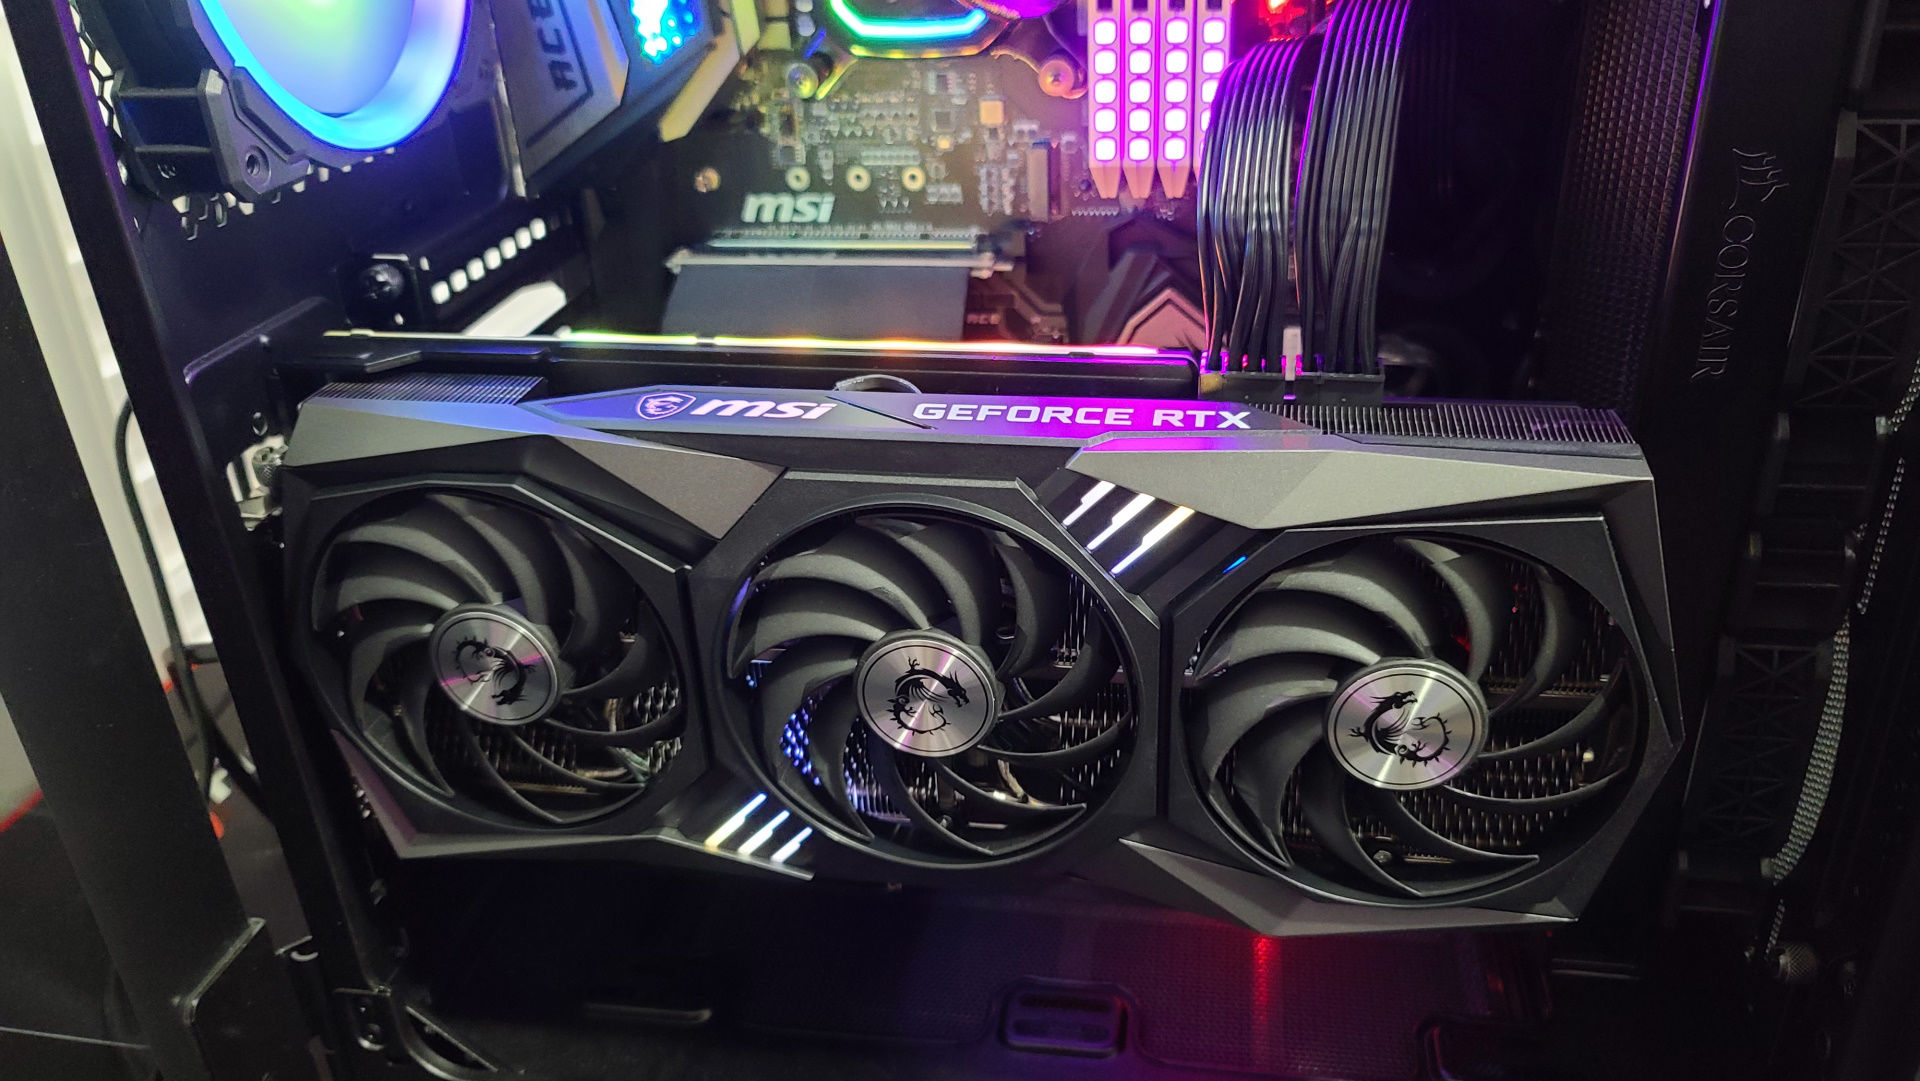 Gaming Benchmarks & Conclusion - MSI GeForce RTX 3070 Gaming X